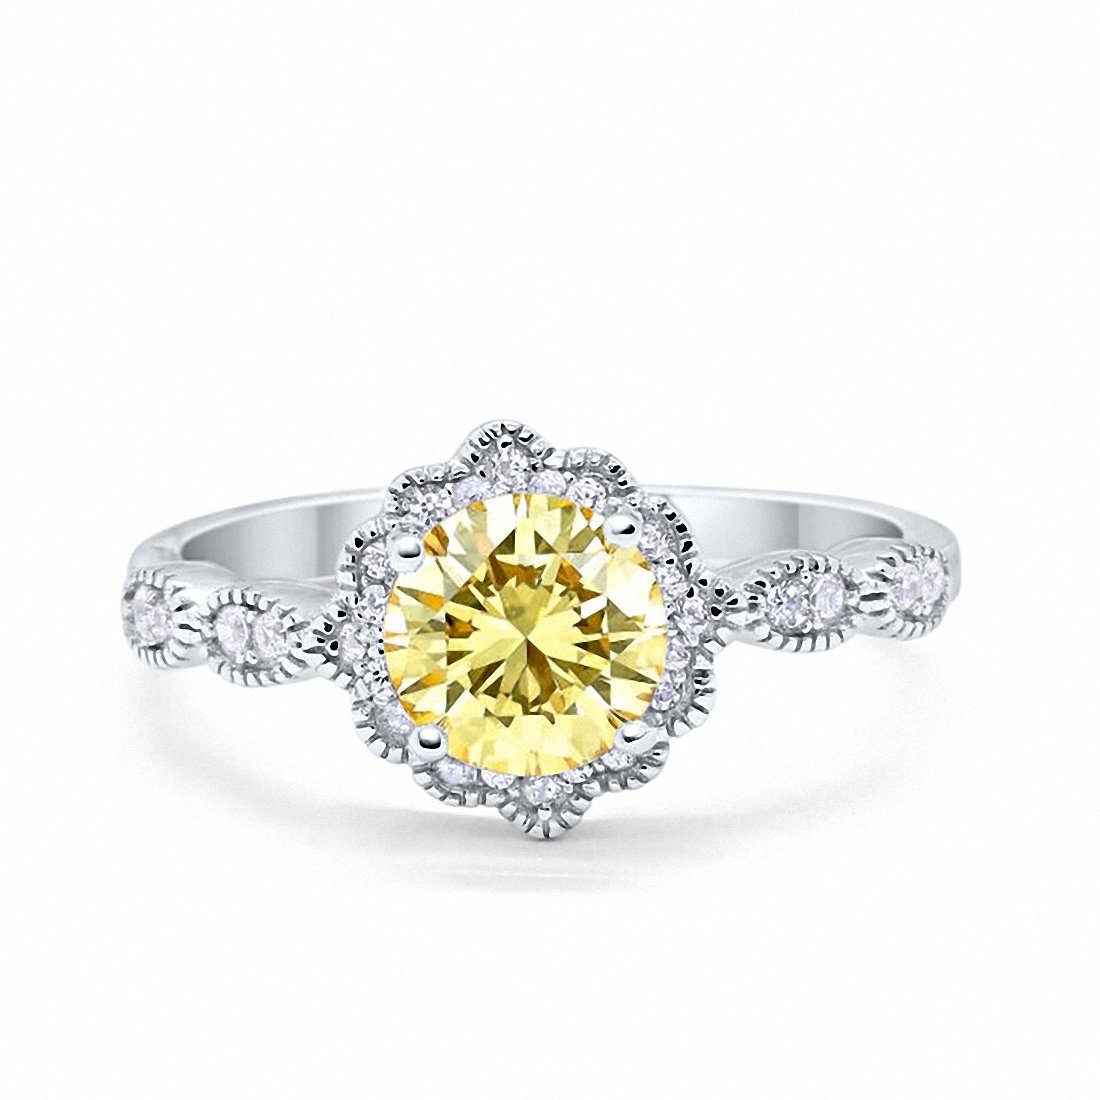 Floral Art Wedding Ring Simulated Yellow Cubic Zirconia 925 Sterling Silver